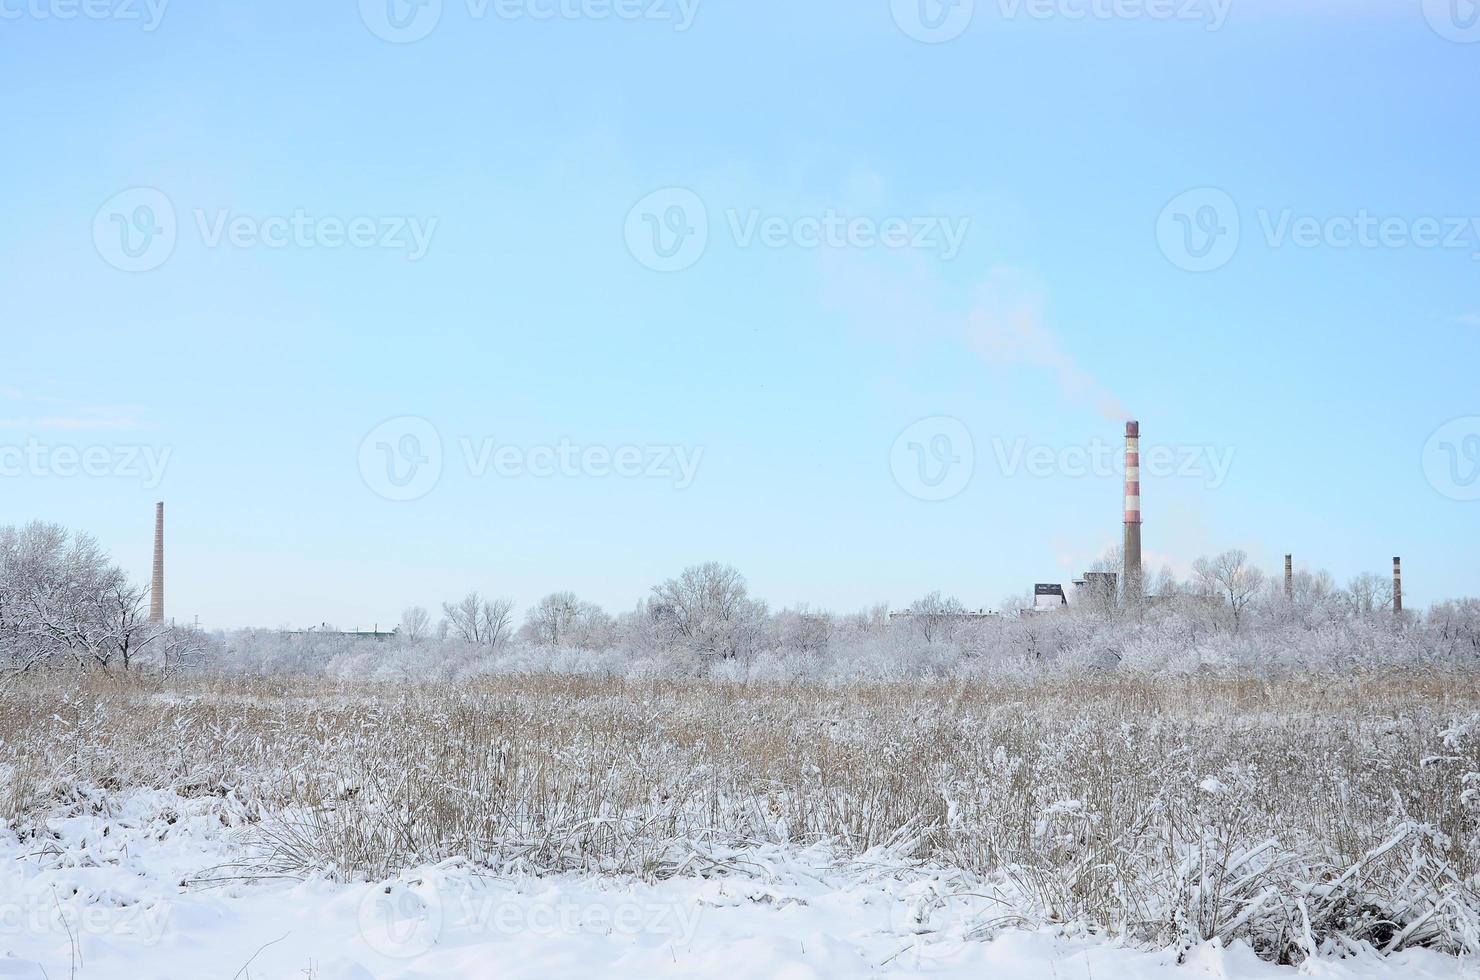 The industrial plant is located behind the swampy terrain, covered with snow. Large field of yellow bulrushes photo